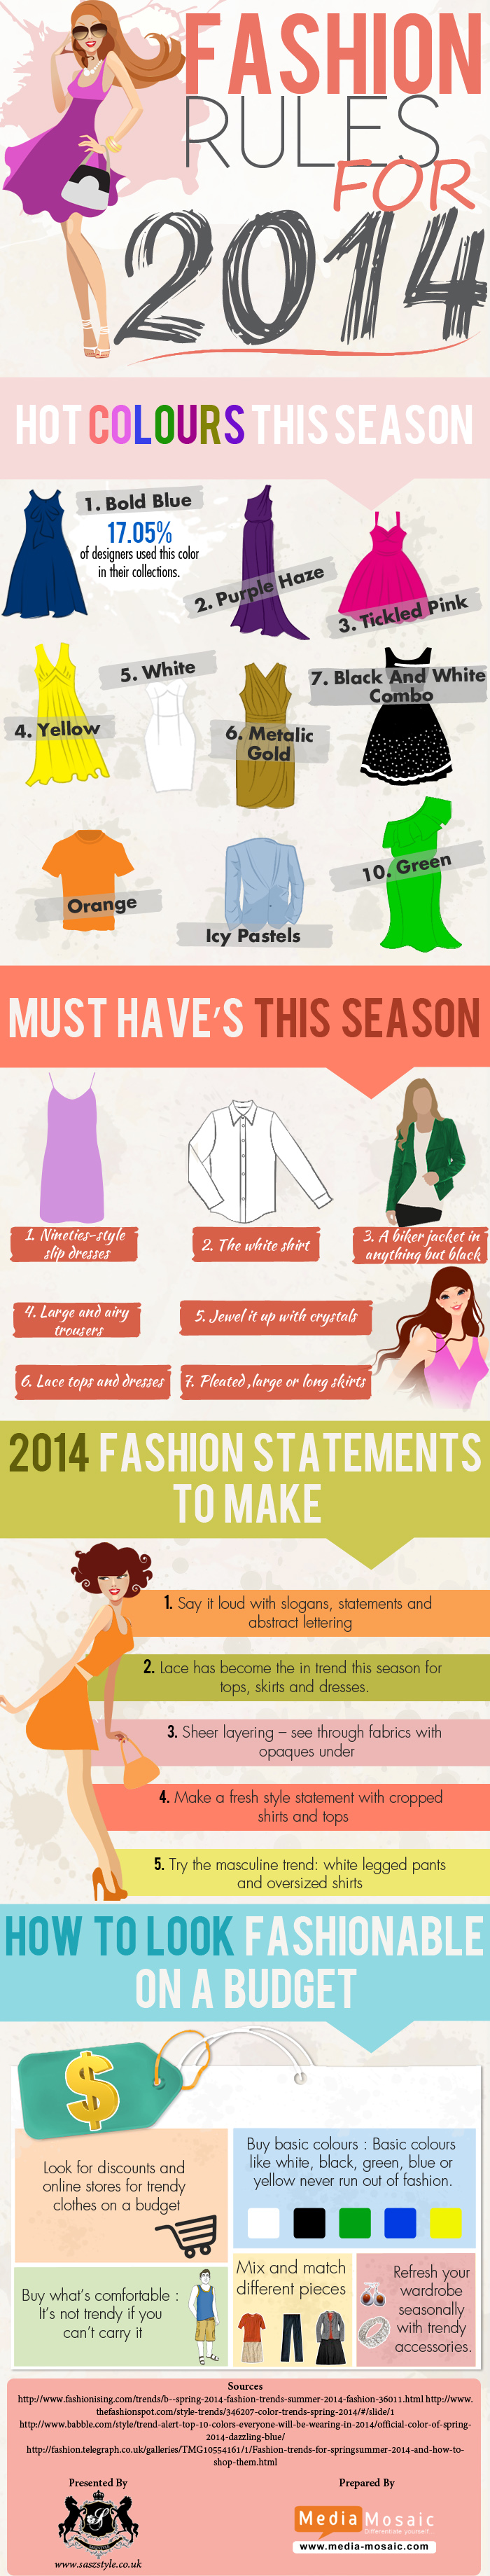 Fashion Rules For 2014